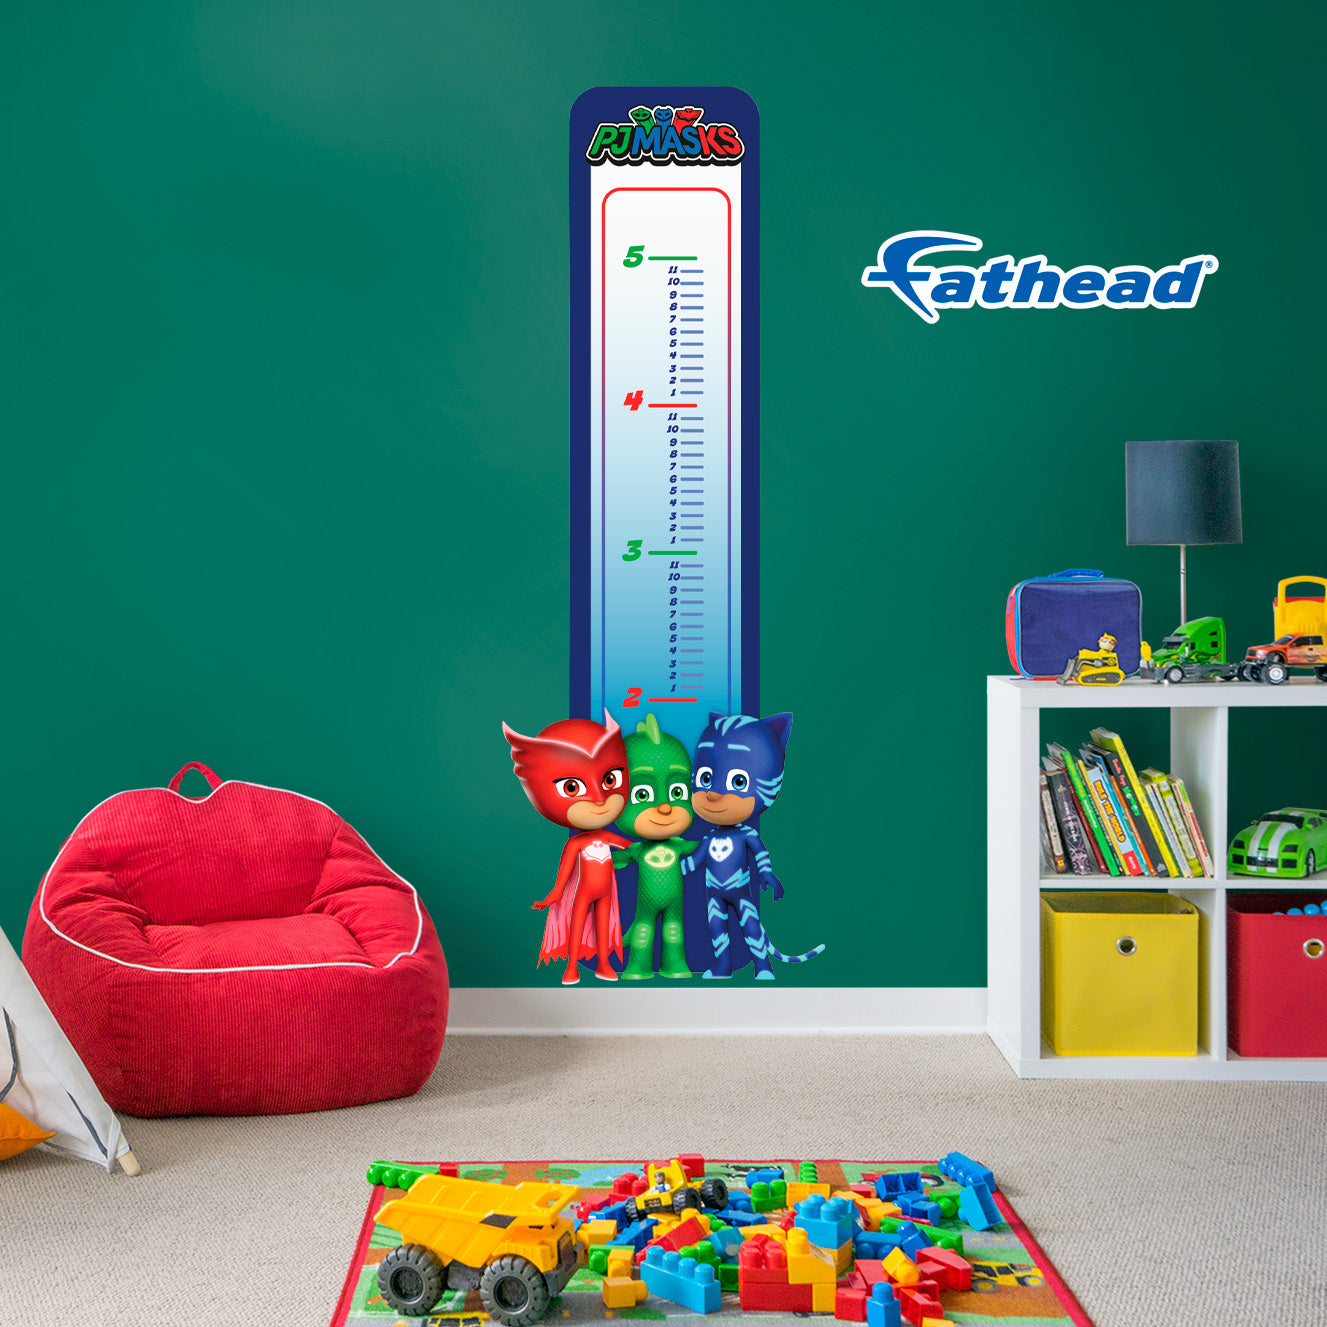 PJ Masks: Together Growth Chart - Officially Licensed Hasbro Removable Adhesive Decal